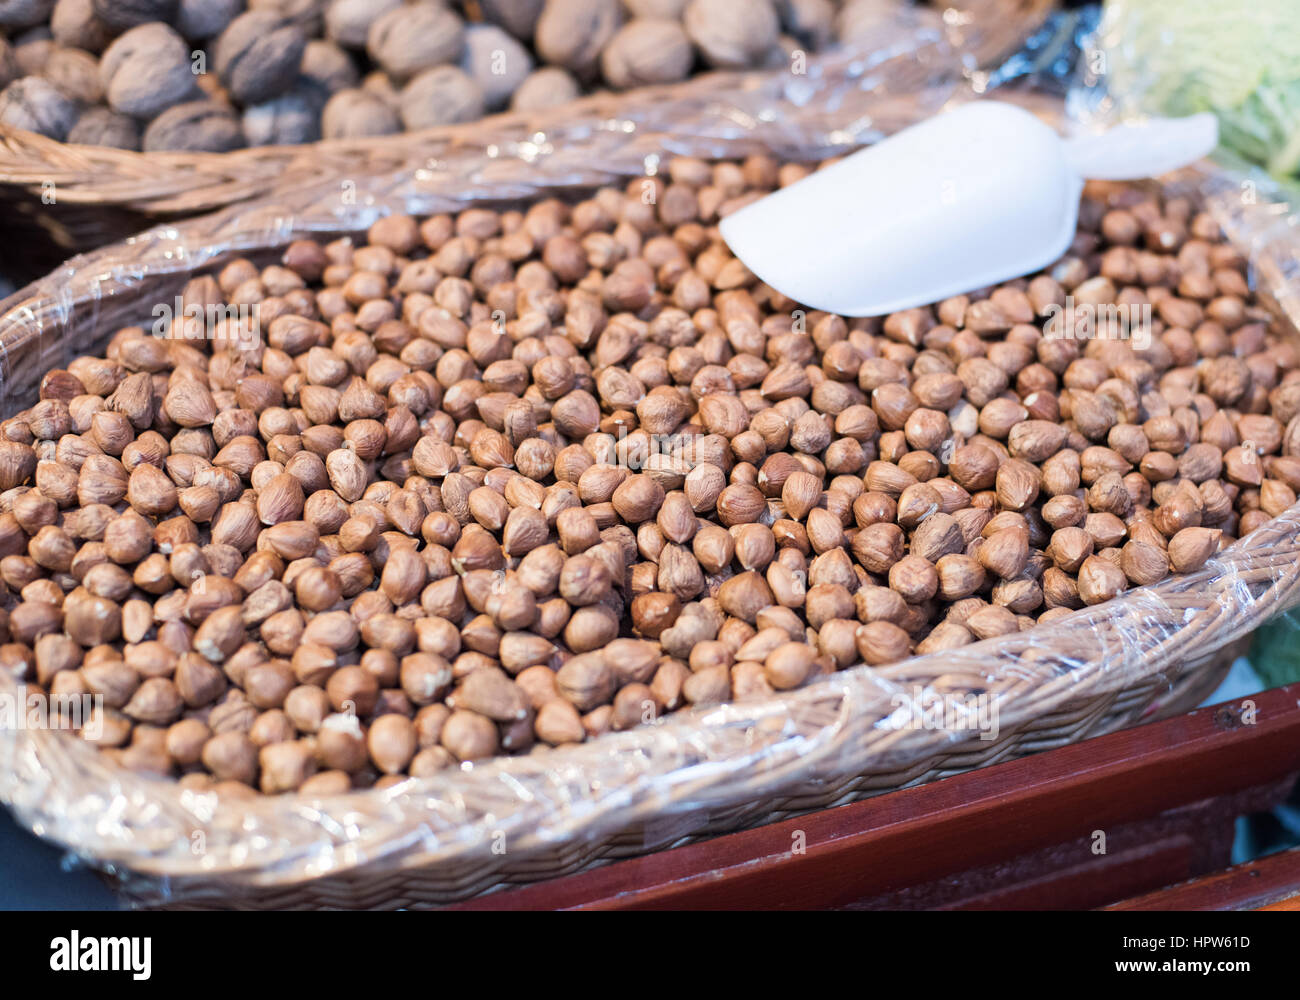 Hazelnuts are sold on the market. Dried fruits Stock Photo